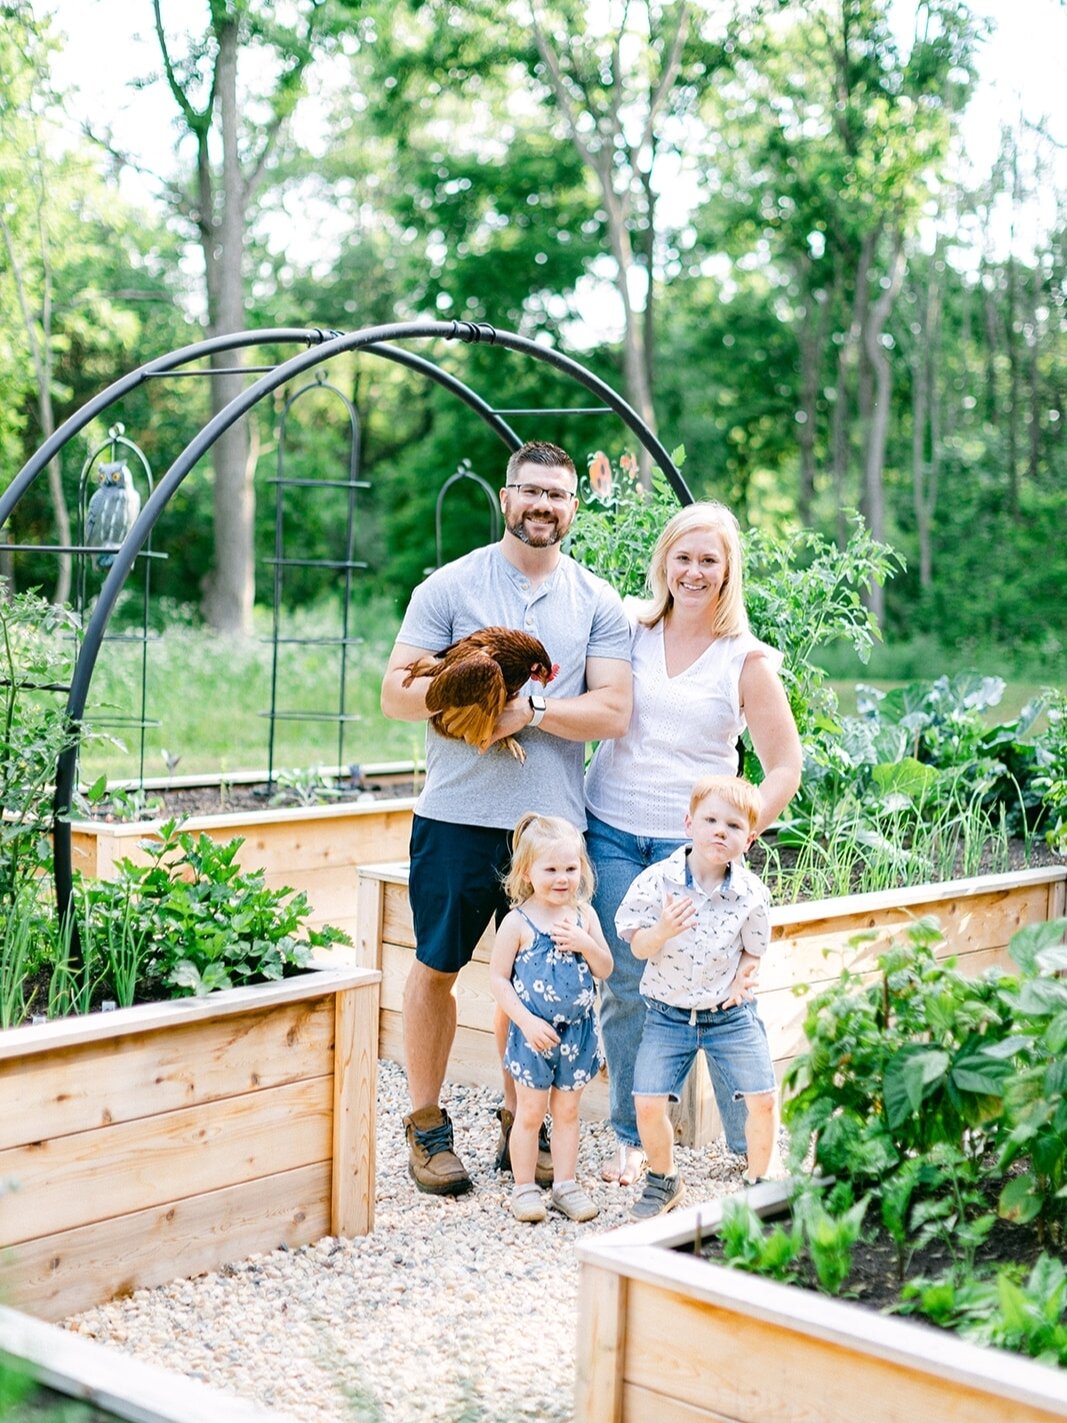 Designed to Nourish 
~another family kitchen garden favorite

There is nothing better than to watch a family grow in the garden.  And I've been lucky enough to be a part of it! 

A few thoughts that come to mind about this family &amp; their garden:
